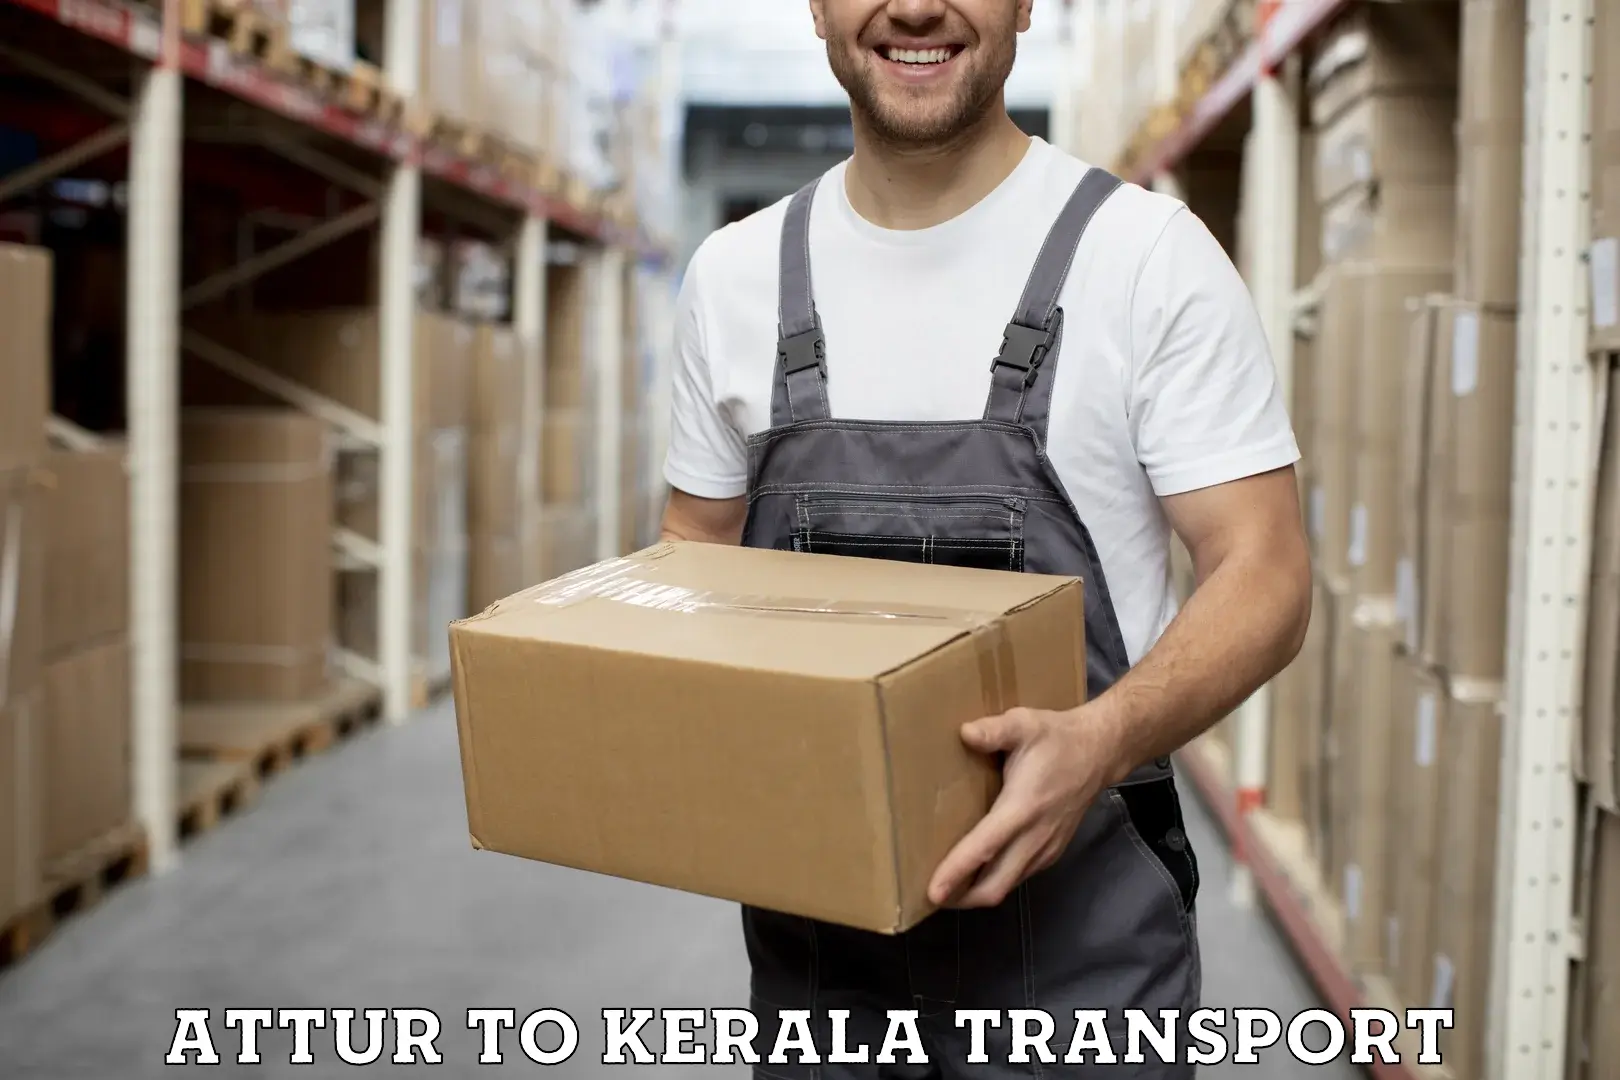 Nearby transport service Attur to Kozhikode